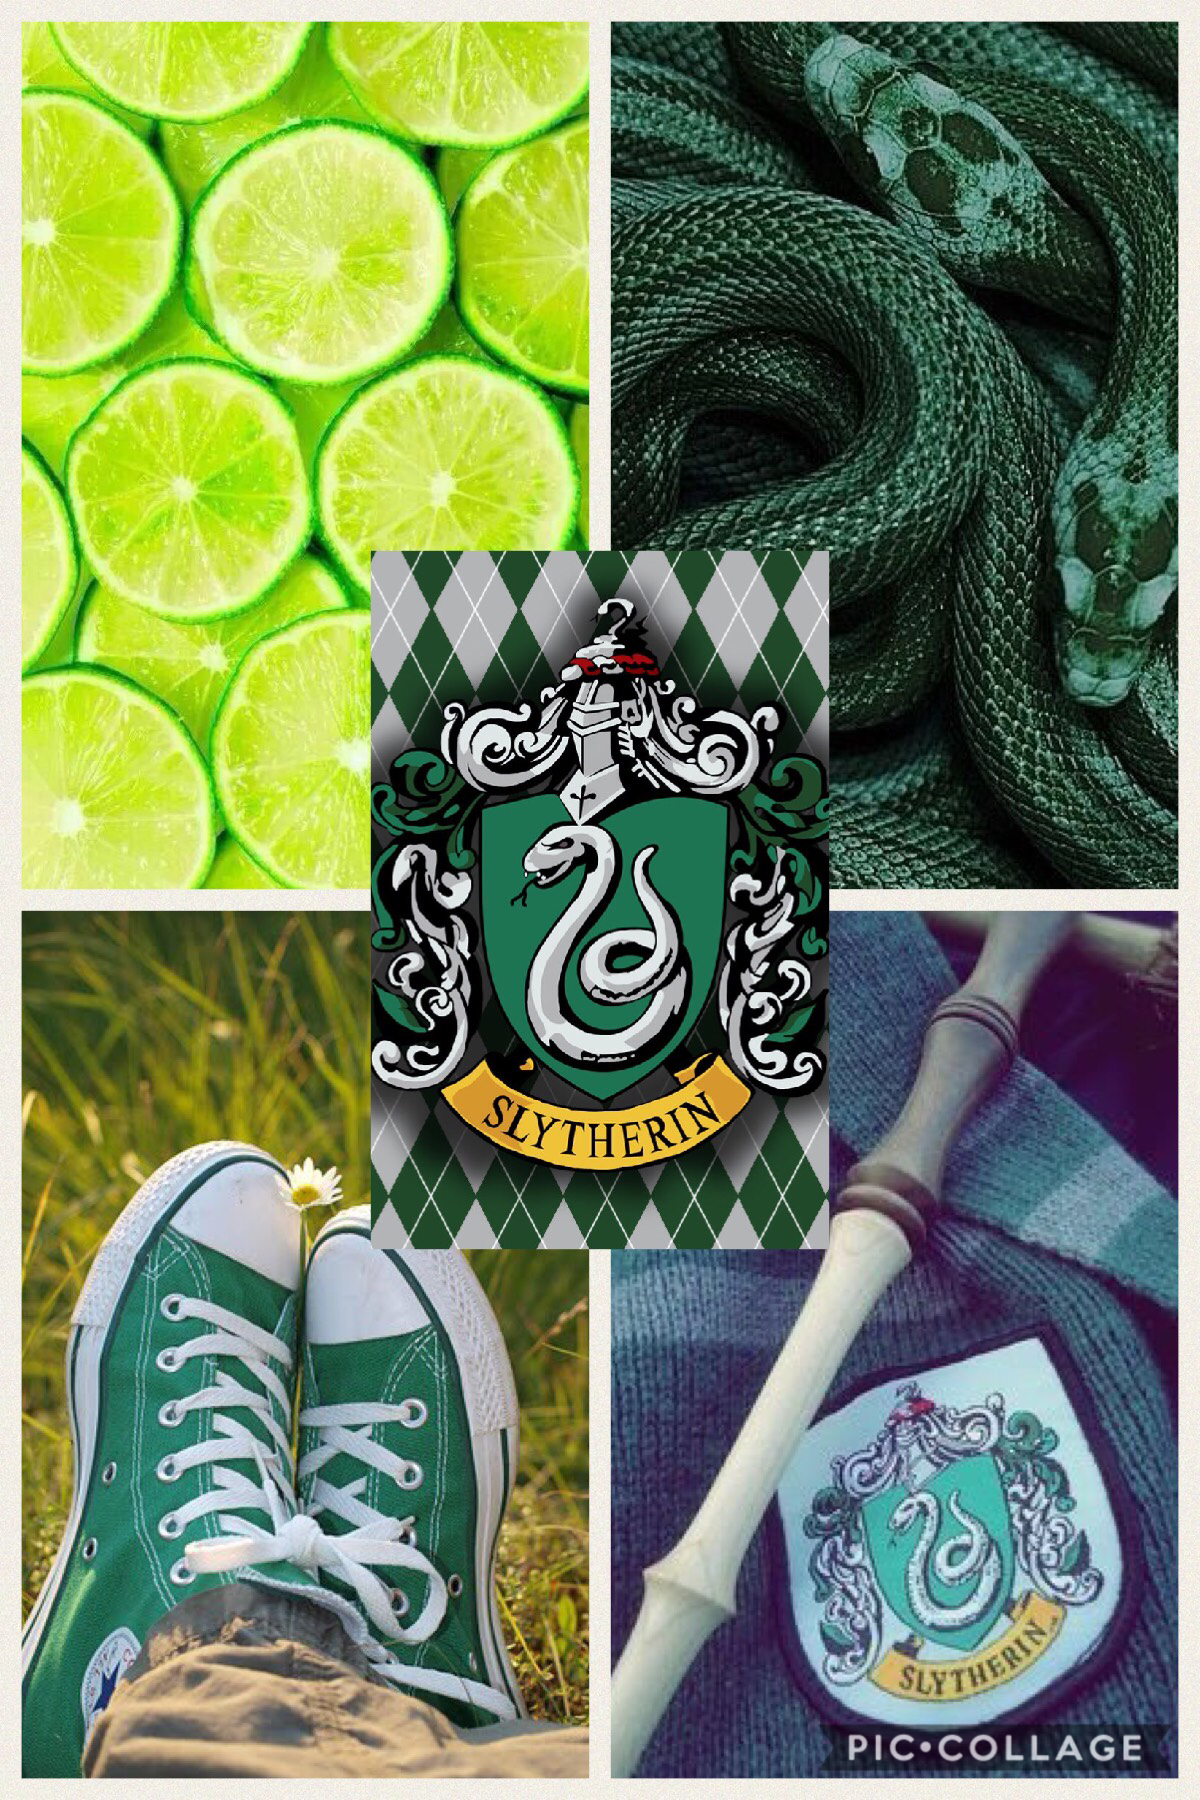 I might not be a slytherin but i have lots of slytherin friends so does that count?